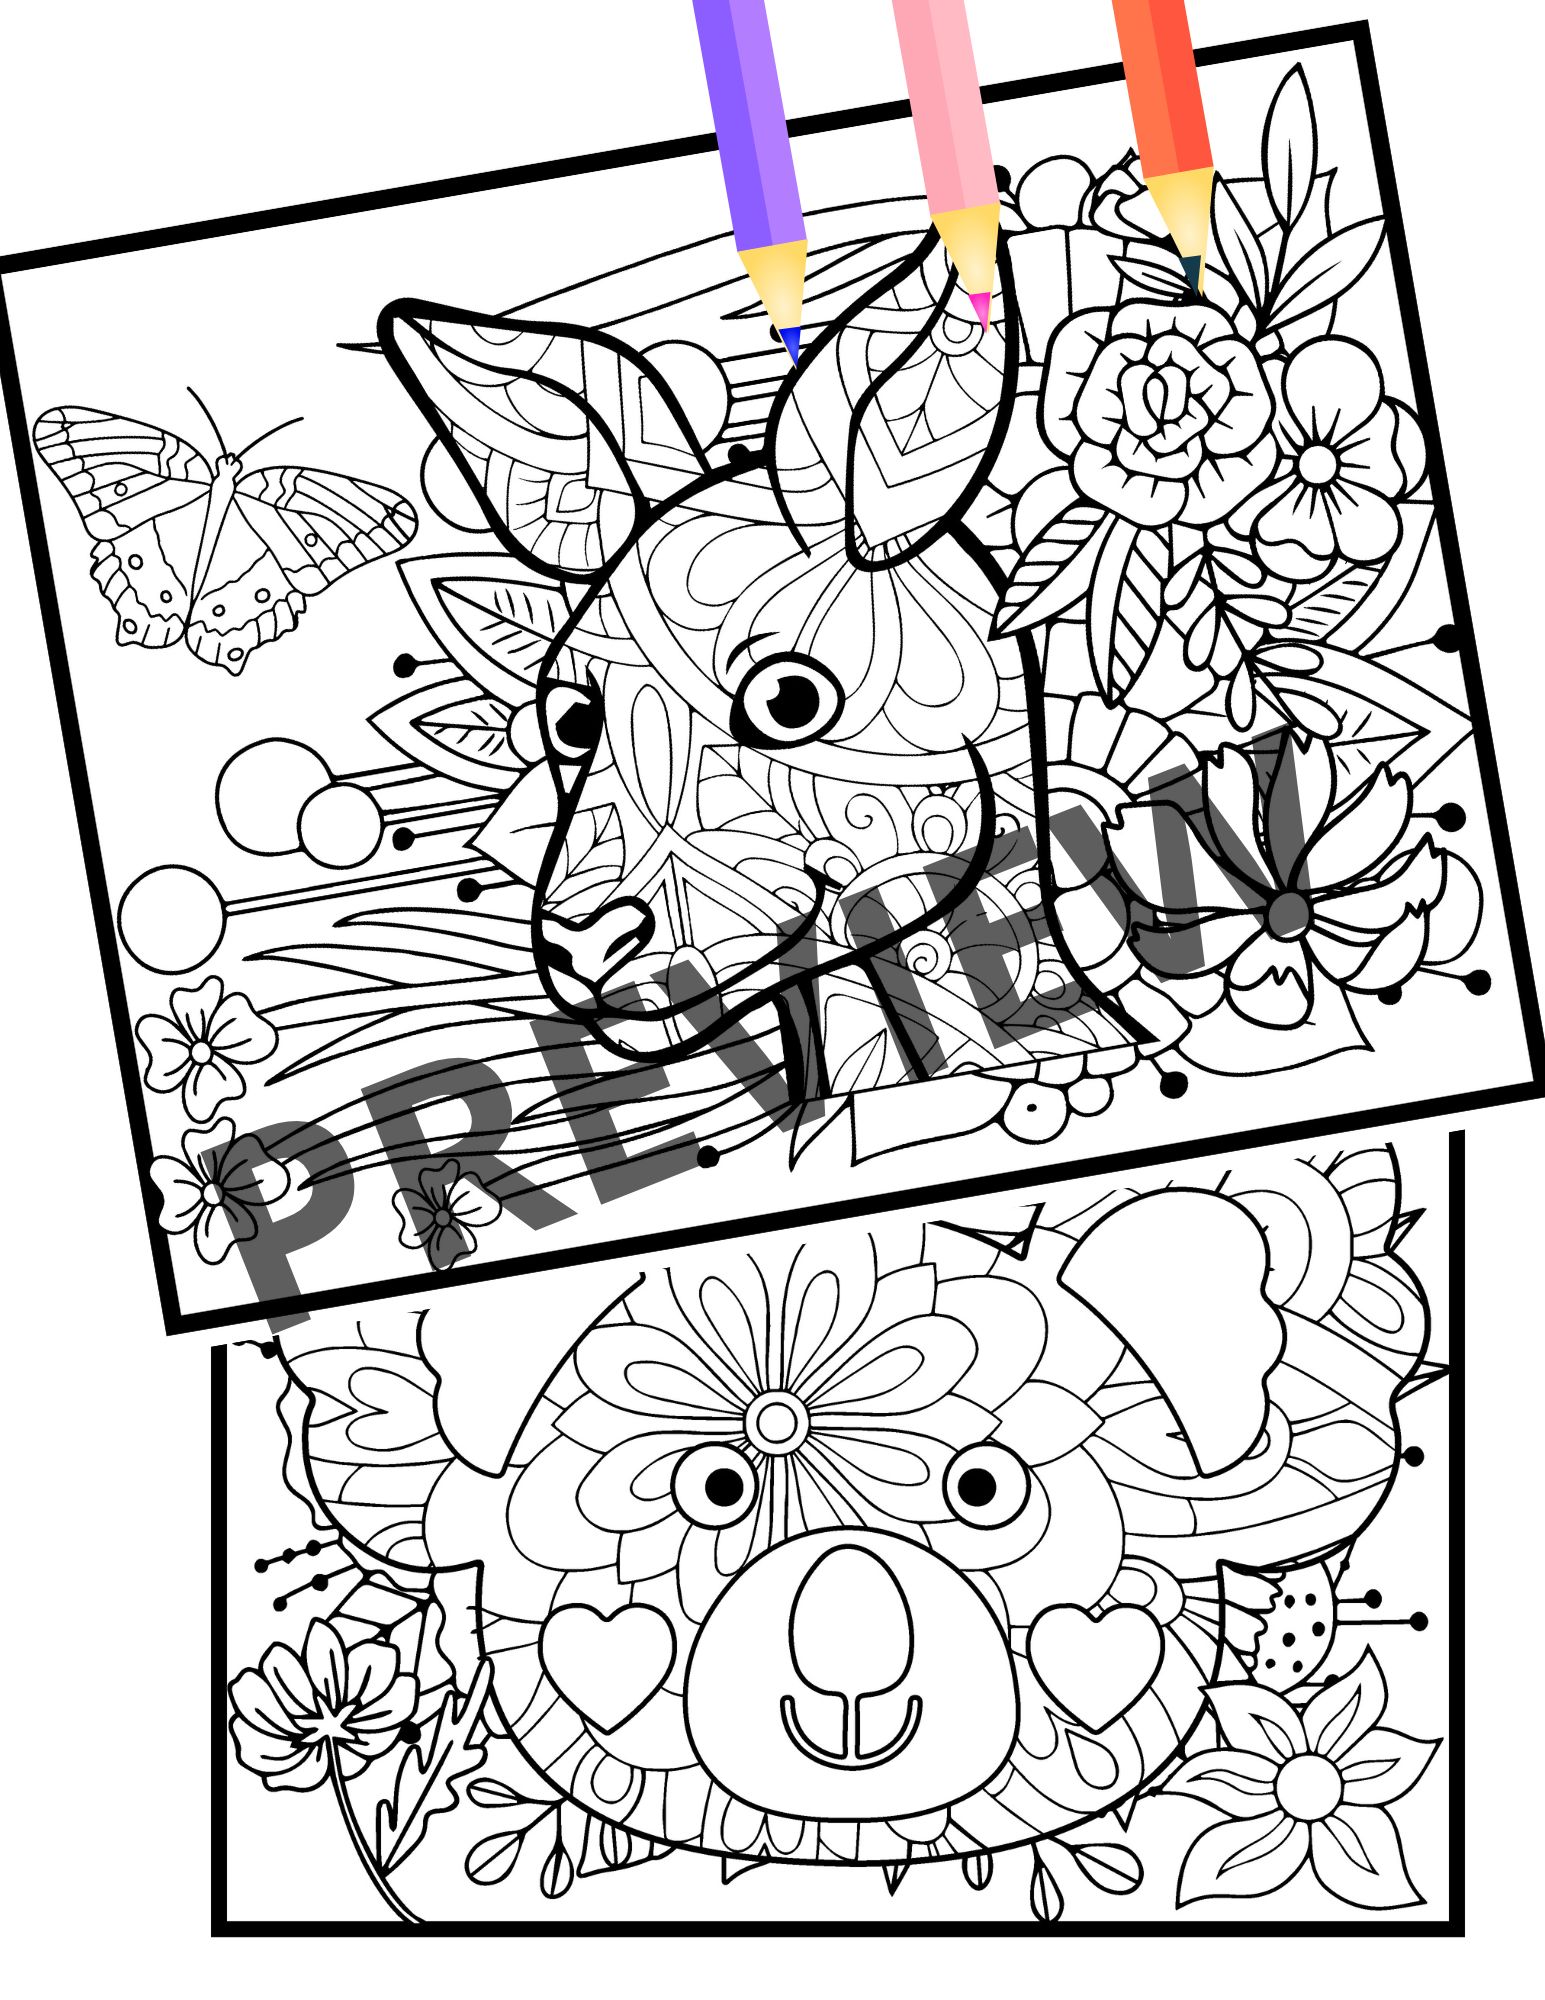 Australian animals mindfulness coloring pages